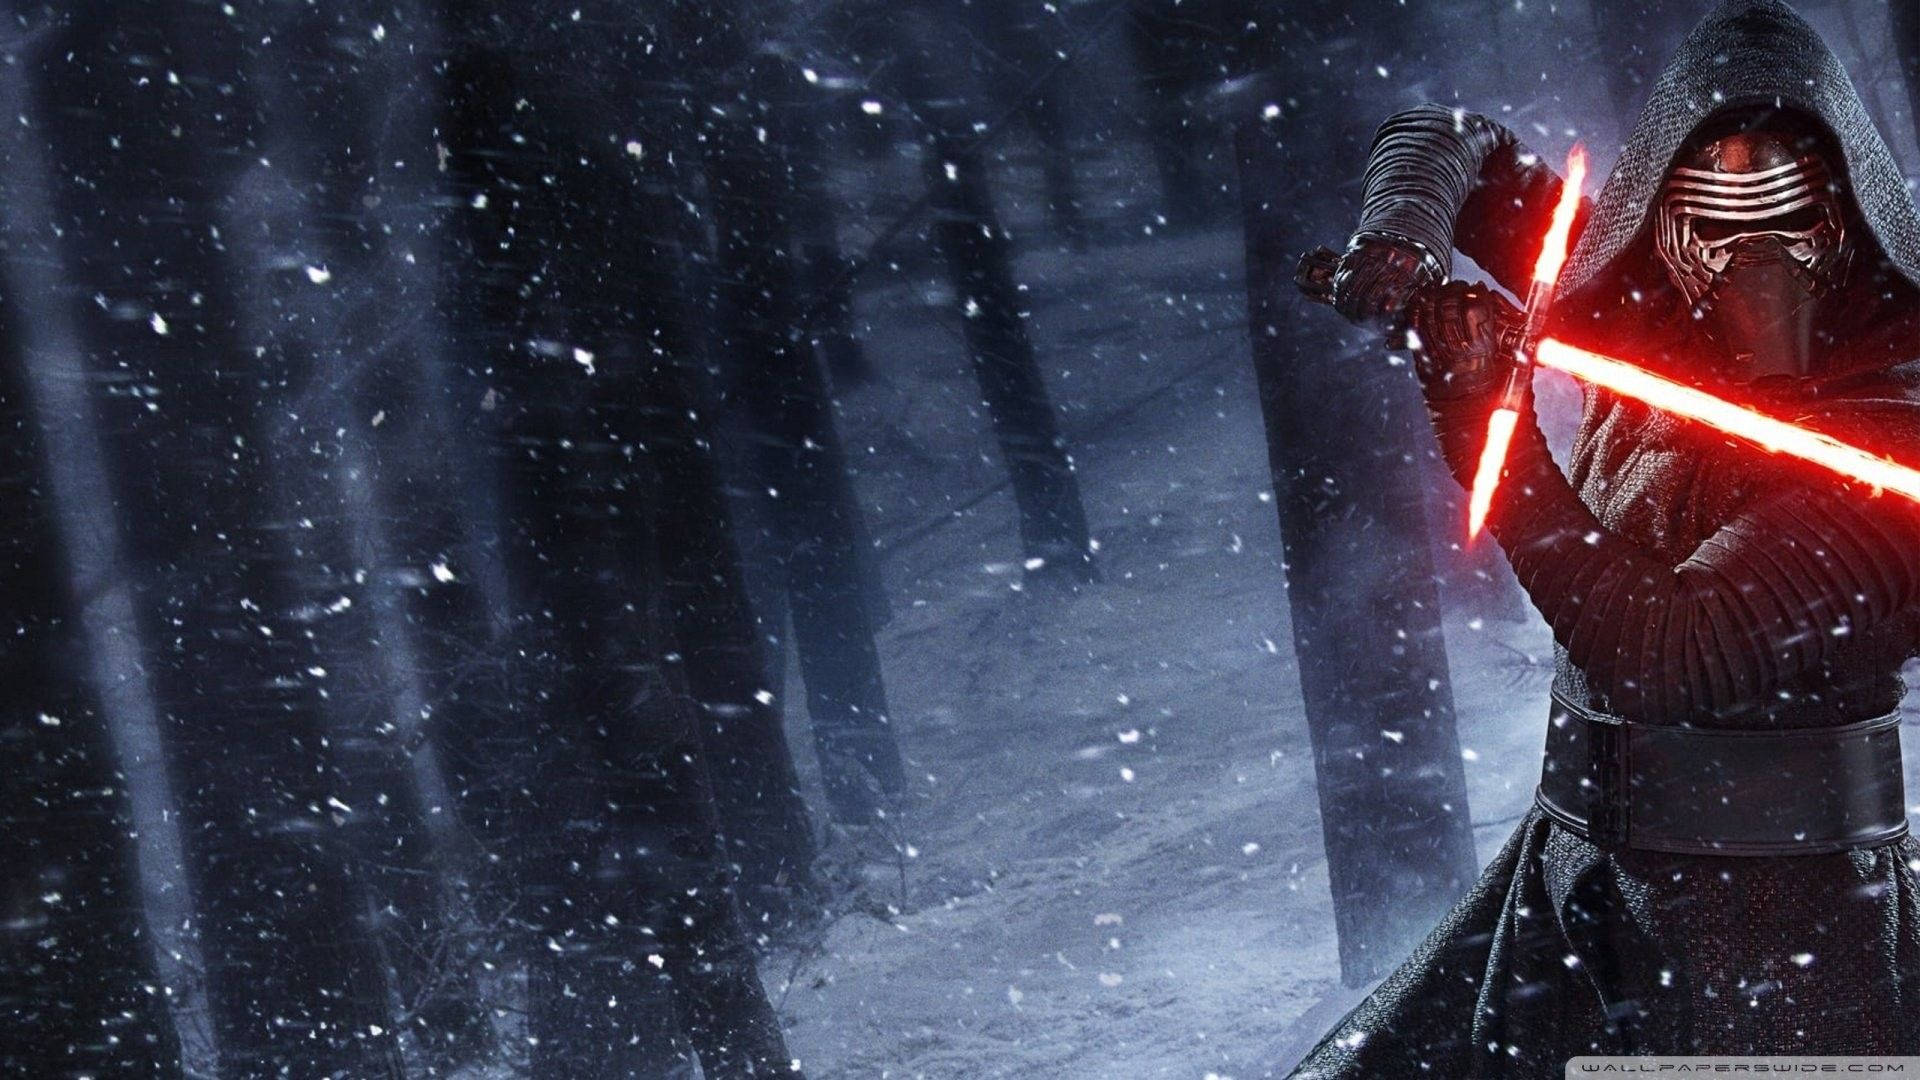 An Intimidating Glimpse of Kylo Ren in Action Wallpaper